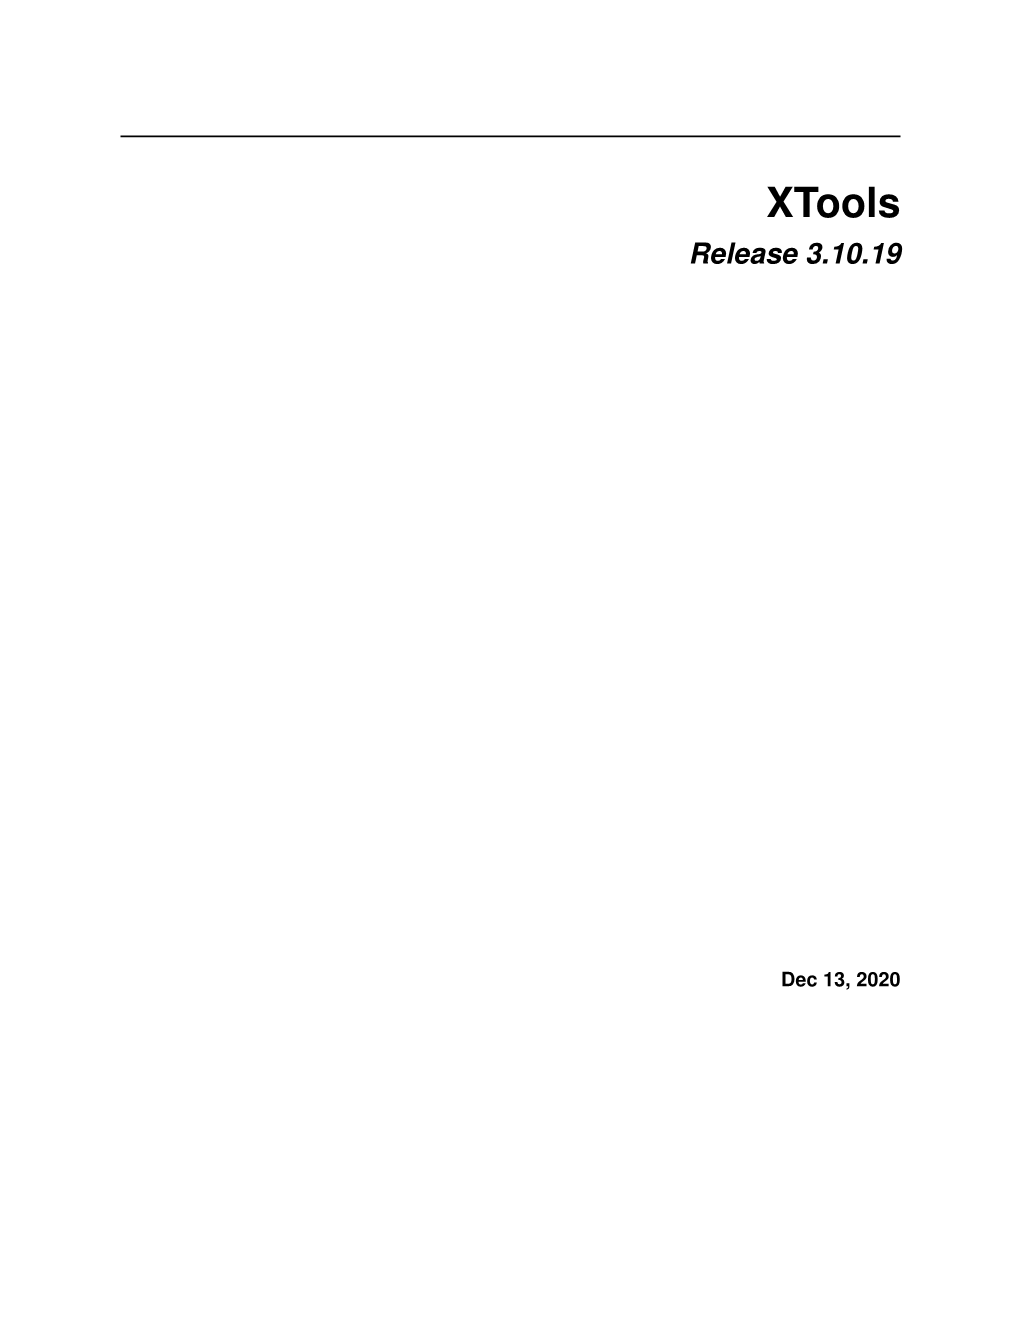 Xtools Release 3.10.19